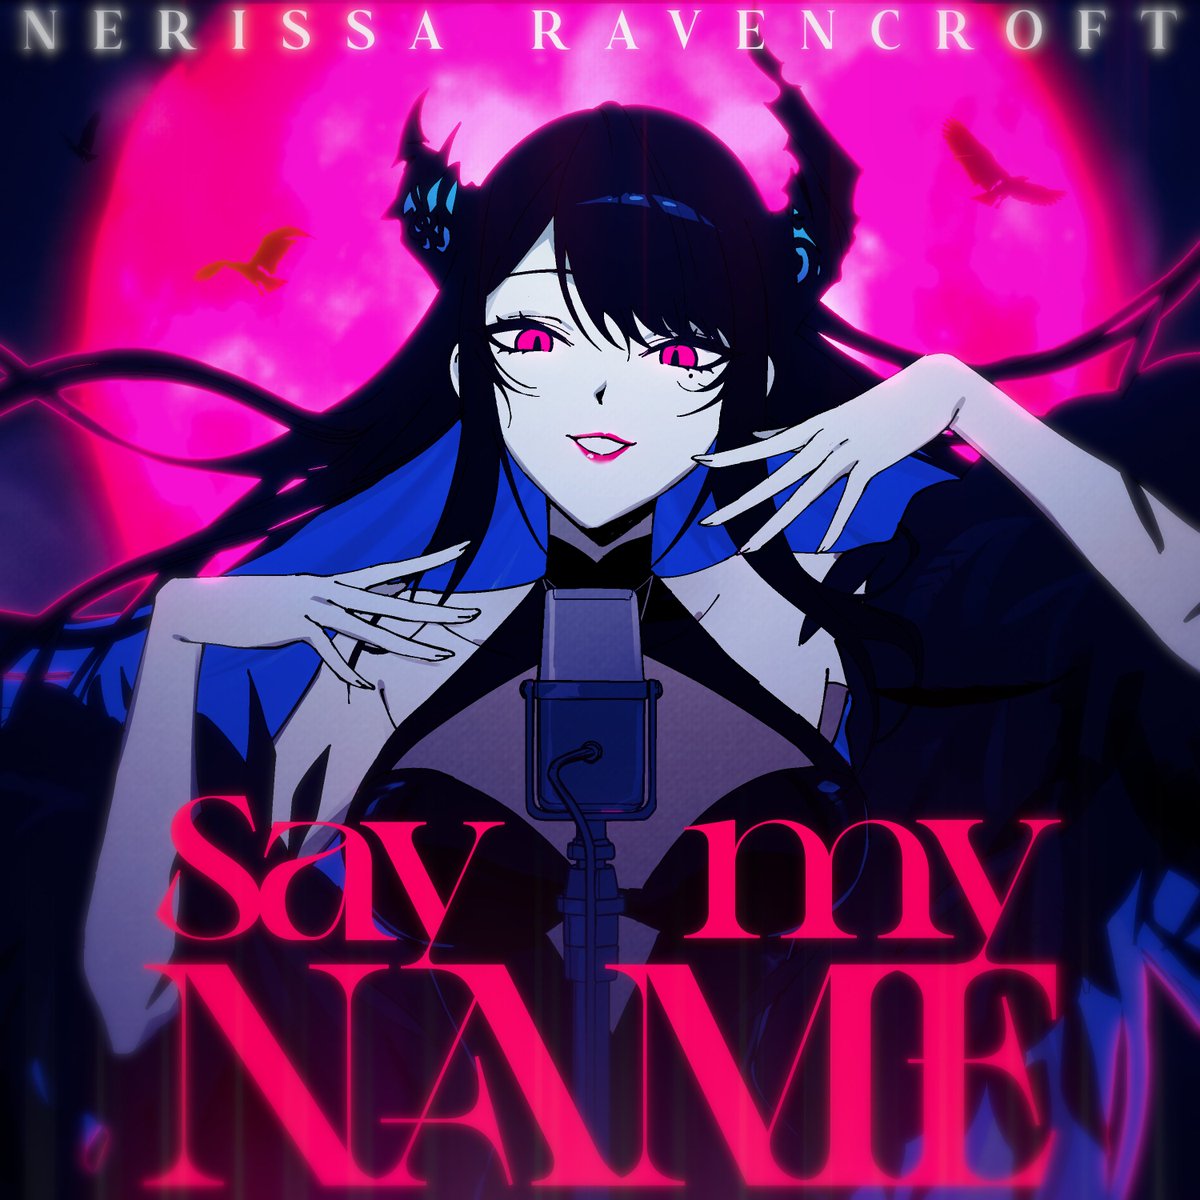 🎼🎧NEW RELEASE🎧🎼 @nerissa_en's New Single 'Say My Name' is out now! With sound that evokes the disco music of the 70s, this track would make you want to dance💃🪩 🎧Stream Here🎧 cover.lnk.to/SayMyName #hololiveEnglish #holoEN